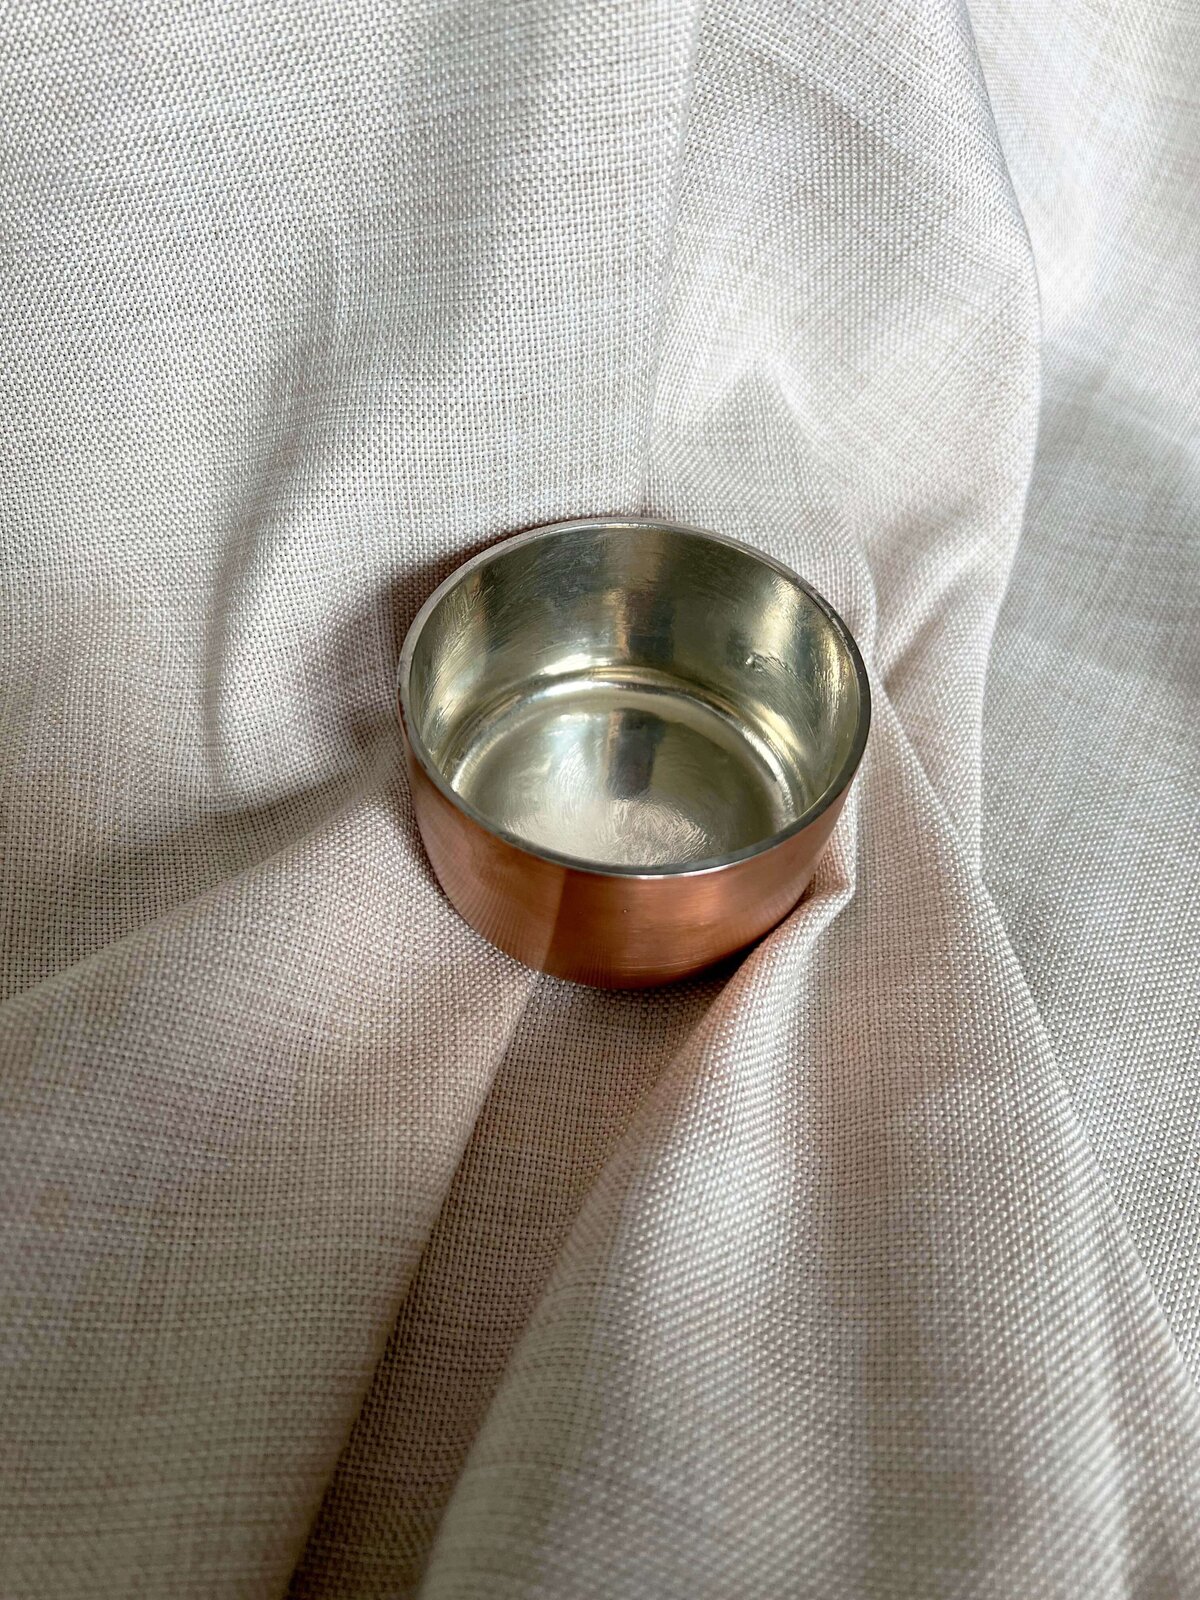 pure-copper-souffle-cup-tin-lined-3mm-thick-house-copper